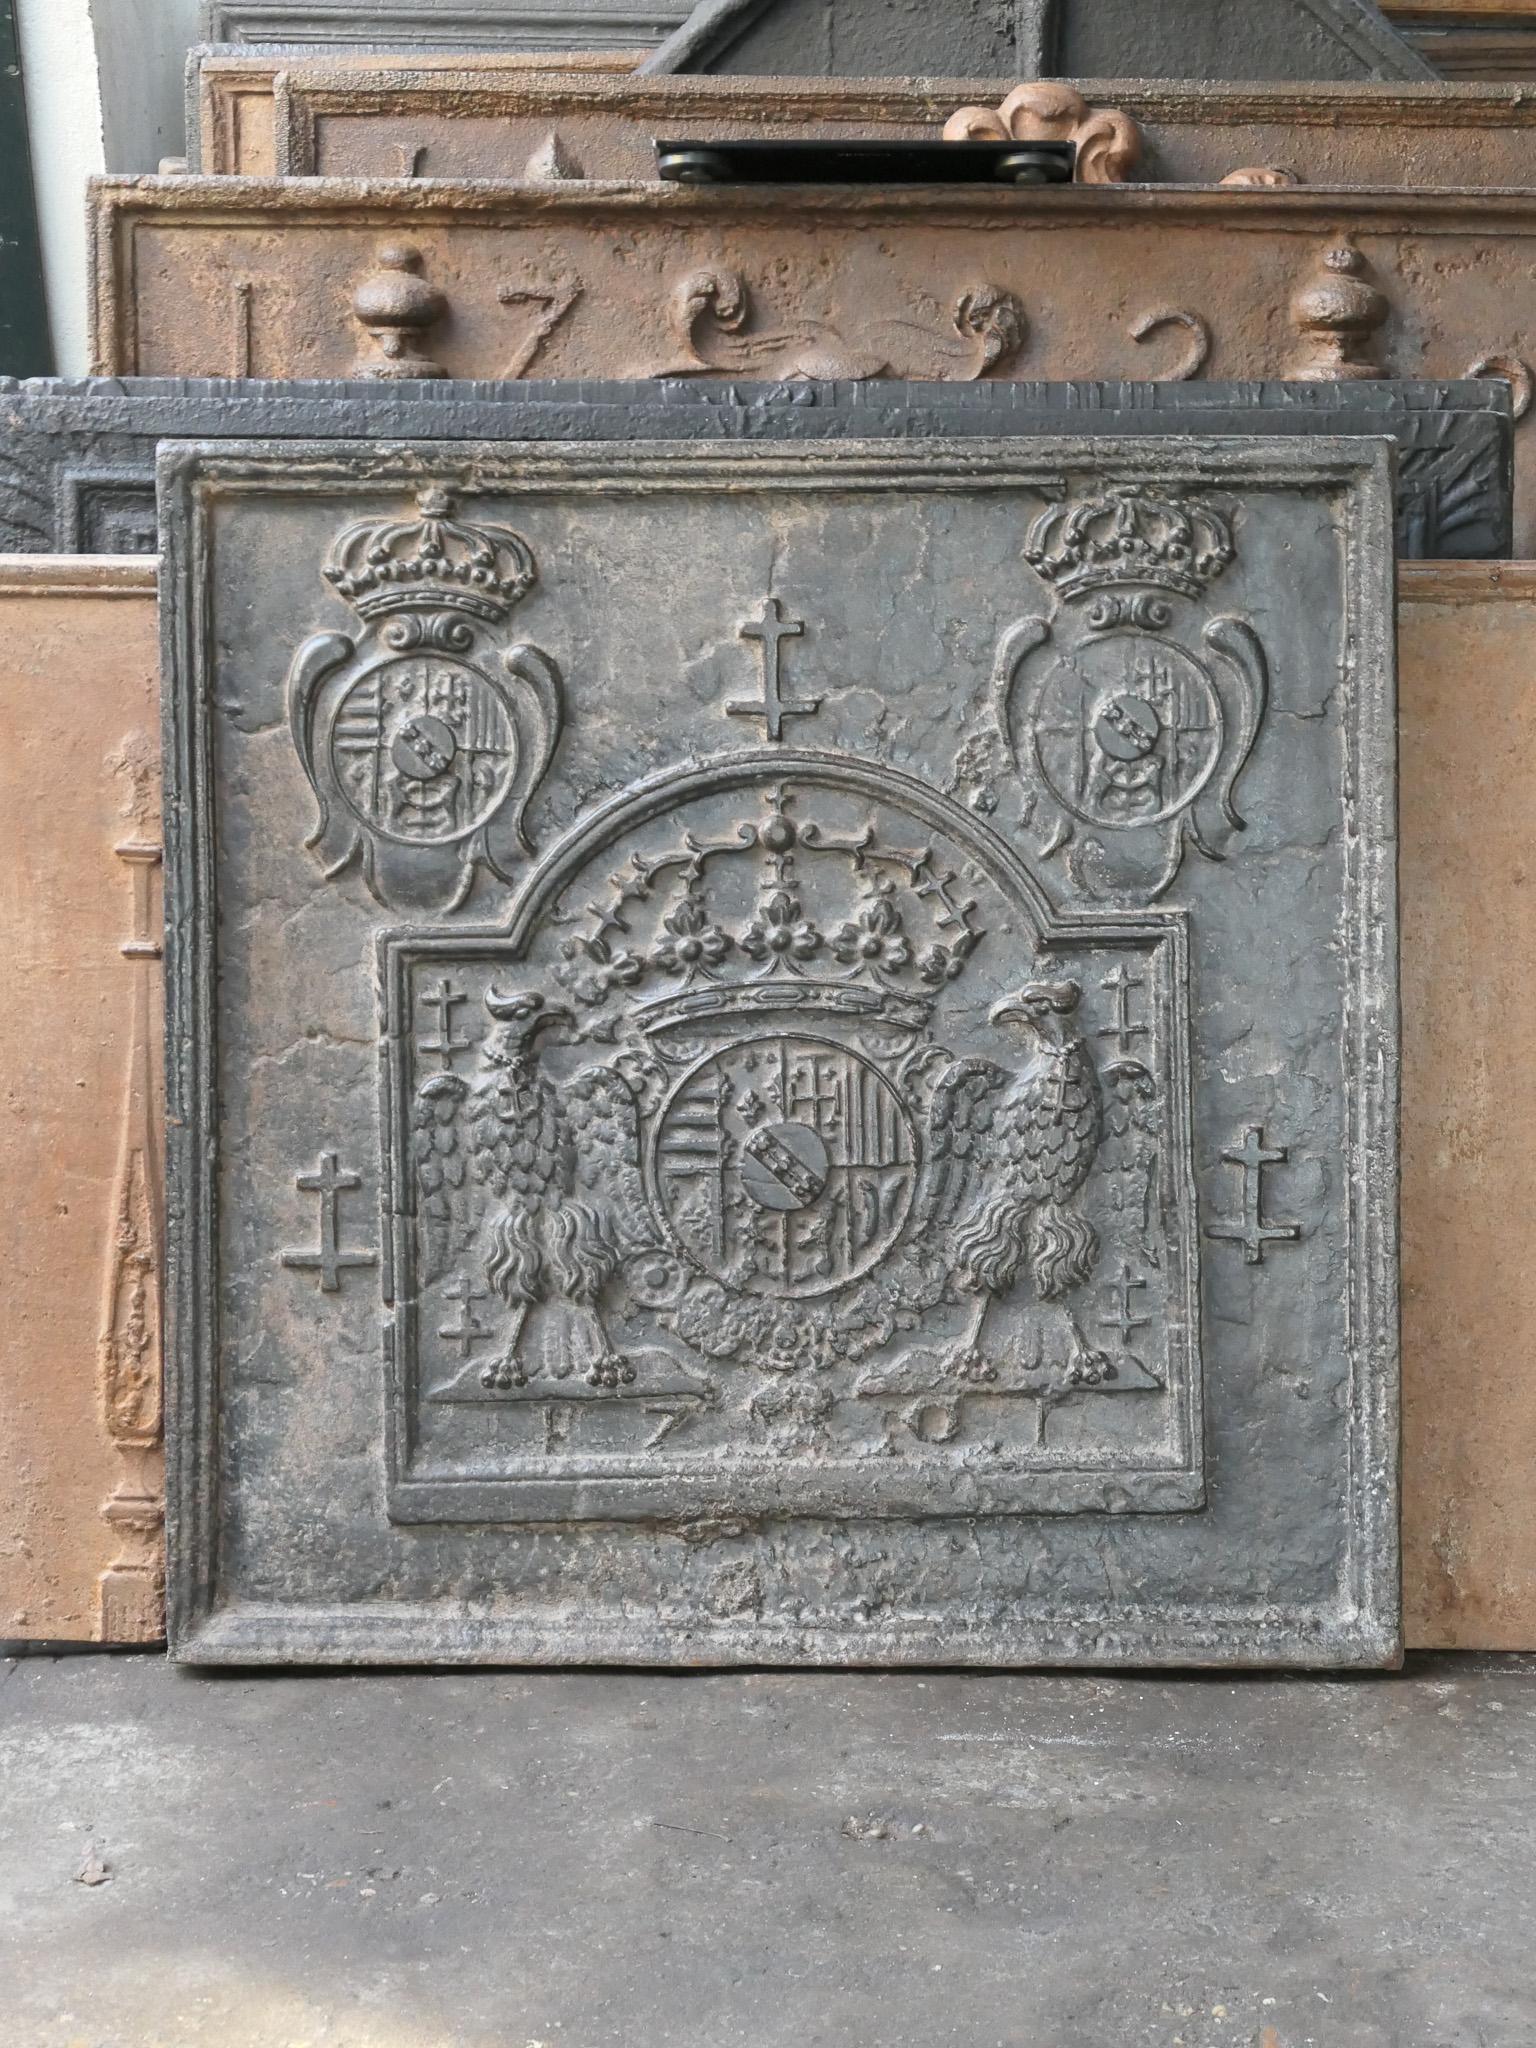 Beautiful 17th century French fireback with the arms of Lorraine. Central is the round shield with arms of Charles III, Duke of Lorraine, flanked by the Arms of Bar-le-Duc. Half round shield with arms of Charles III, Duke of Lorraine, flanked by the